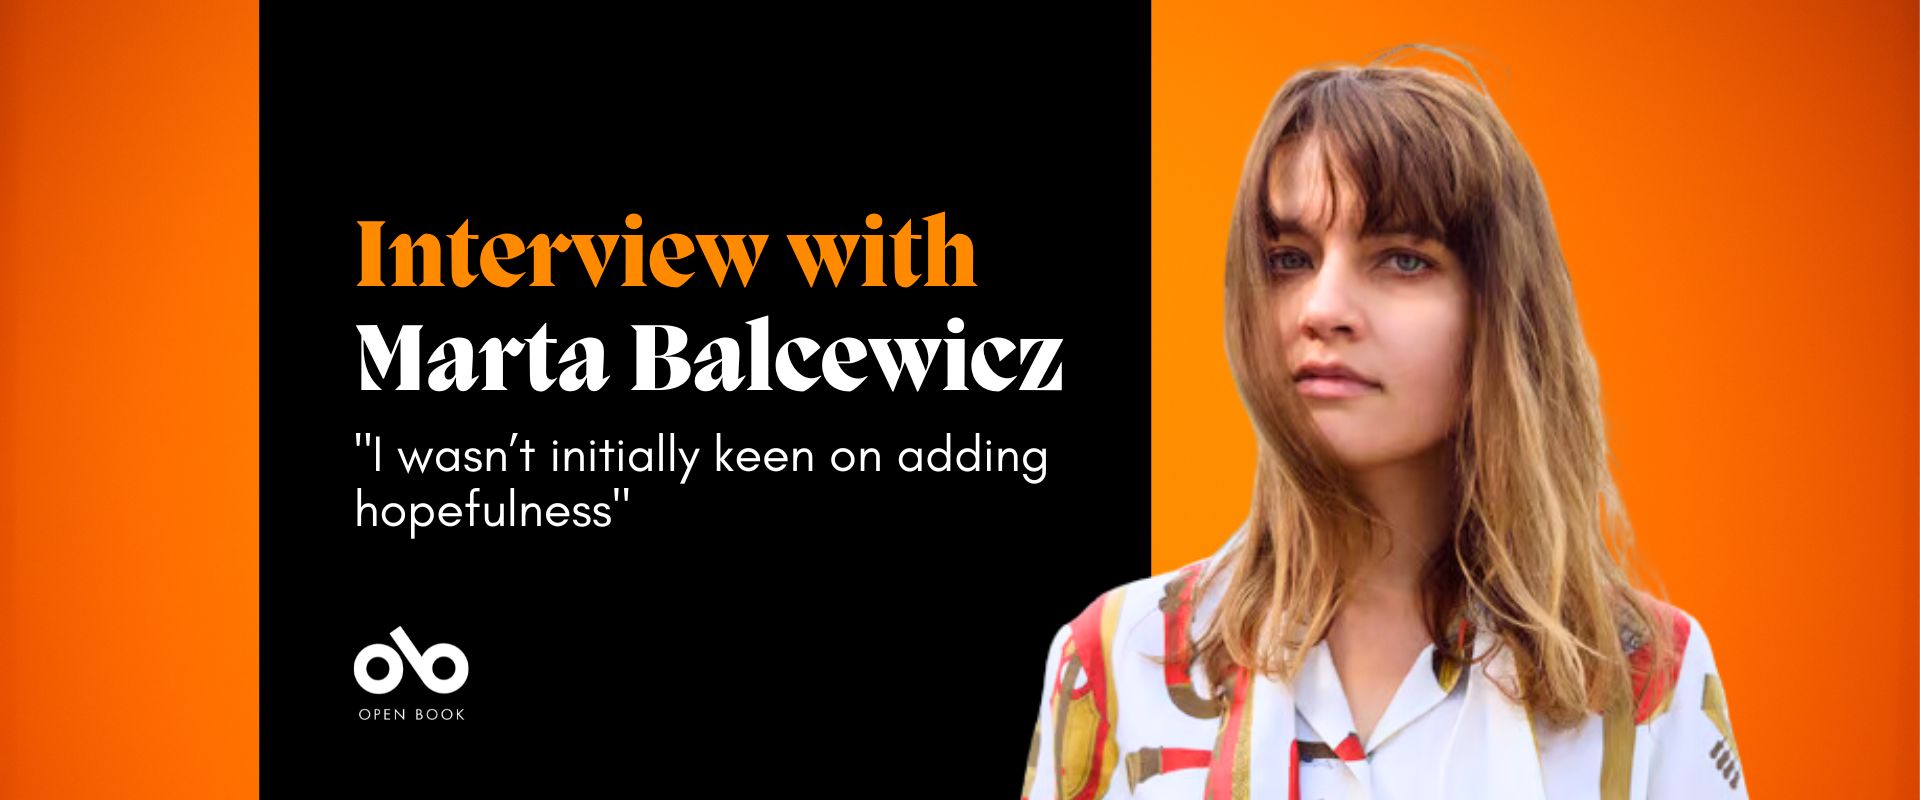 black and orange banner image with text reading "interview with Marta Balcewicz" and "I wasn't initially keen on adding hopefulness". Photo of author Marta Balecewicz on the right, Open Book logo bottom left